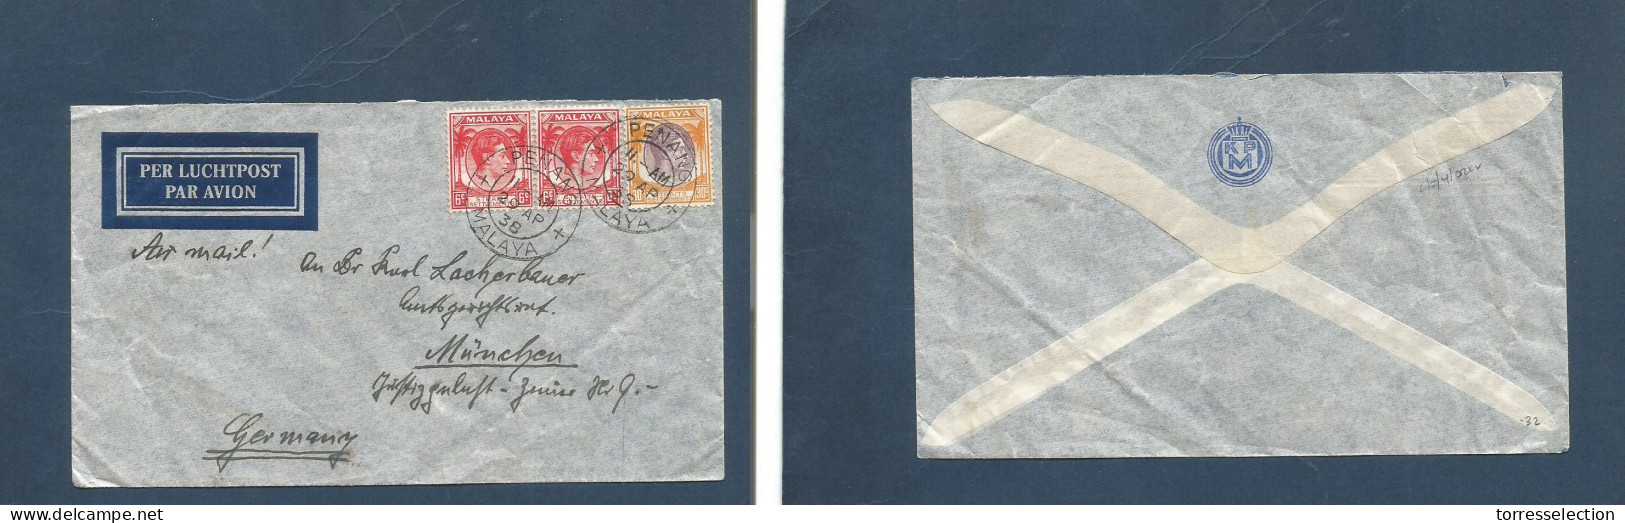 MALAYSIA. 1938 (29 Apr) Penang - Germany, Munich. Air Multifkd Env. Lovely Condition Usage. 42c Rate. - Malaysia (1964-...)